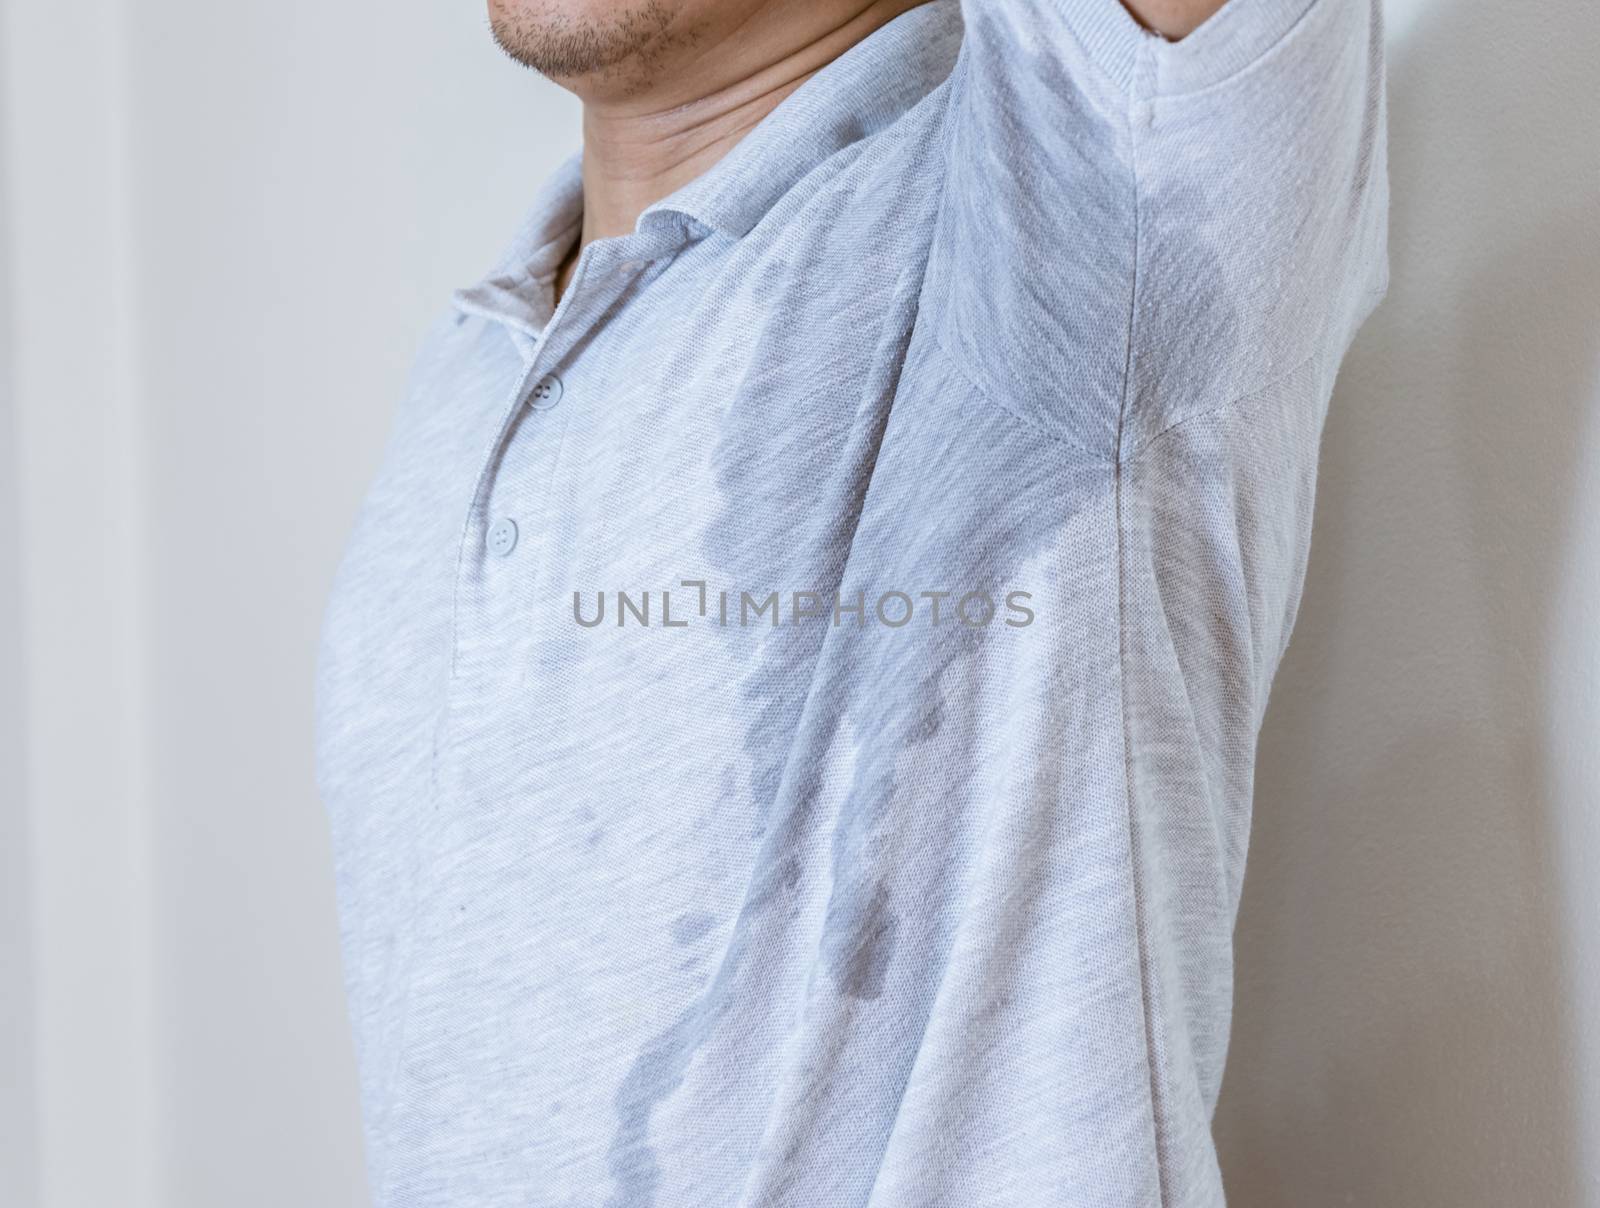 Man with sweat stain on clothes against, using deodorant